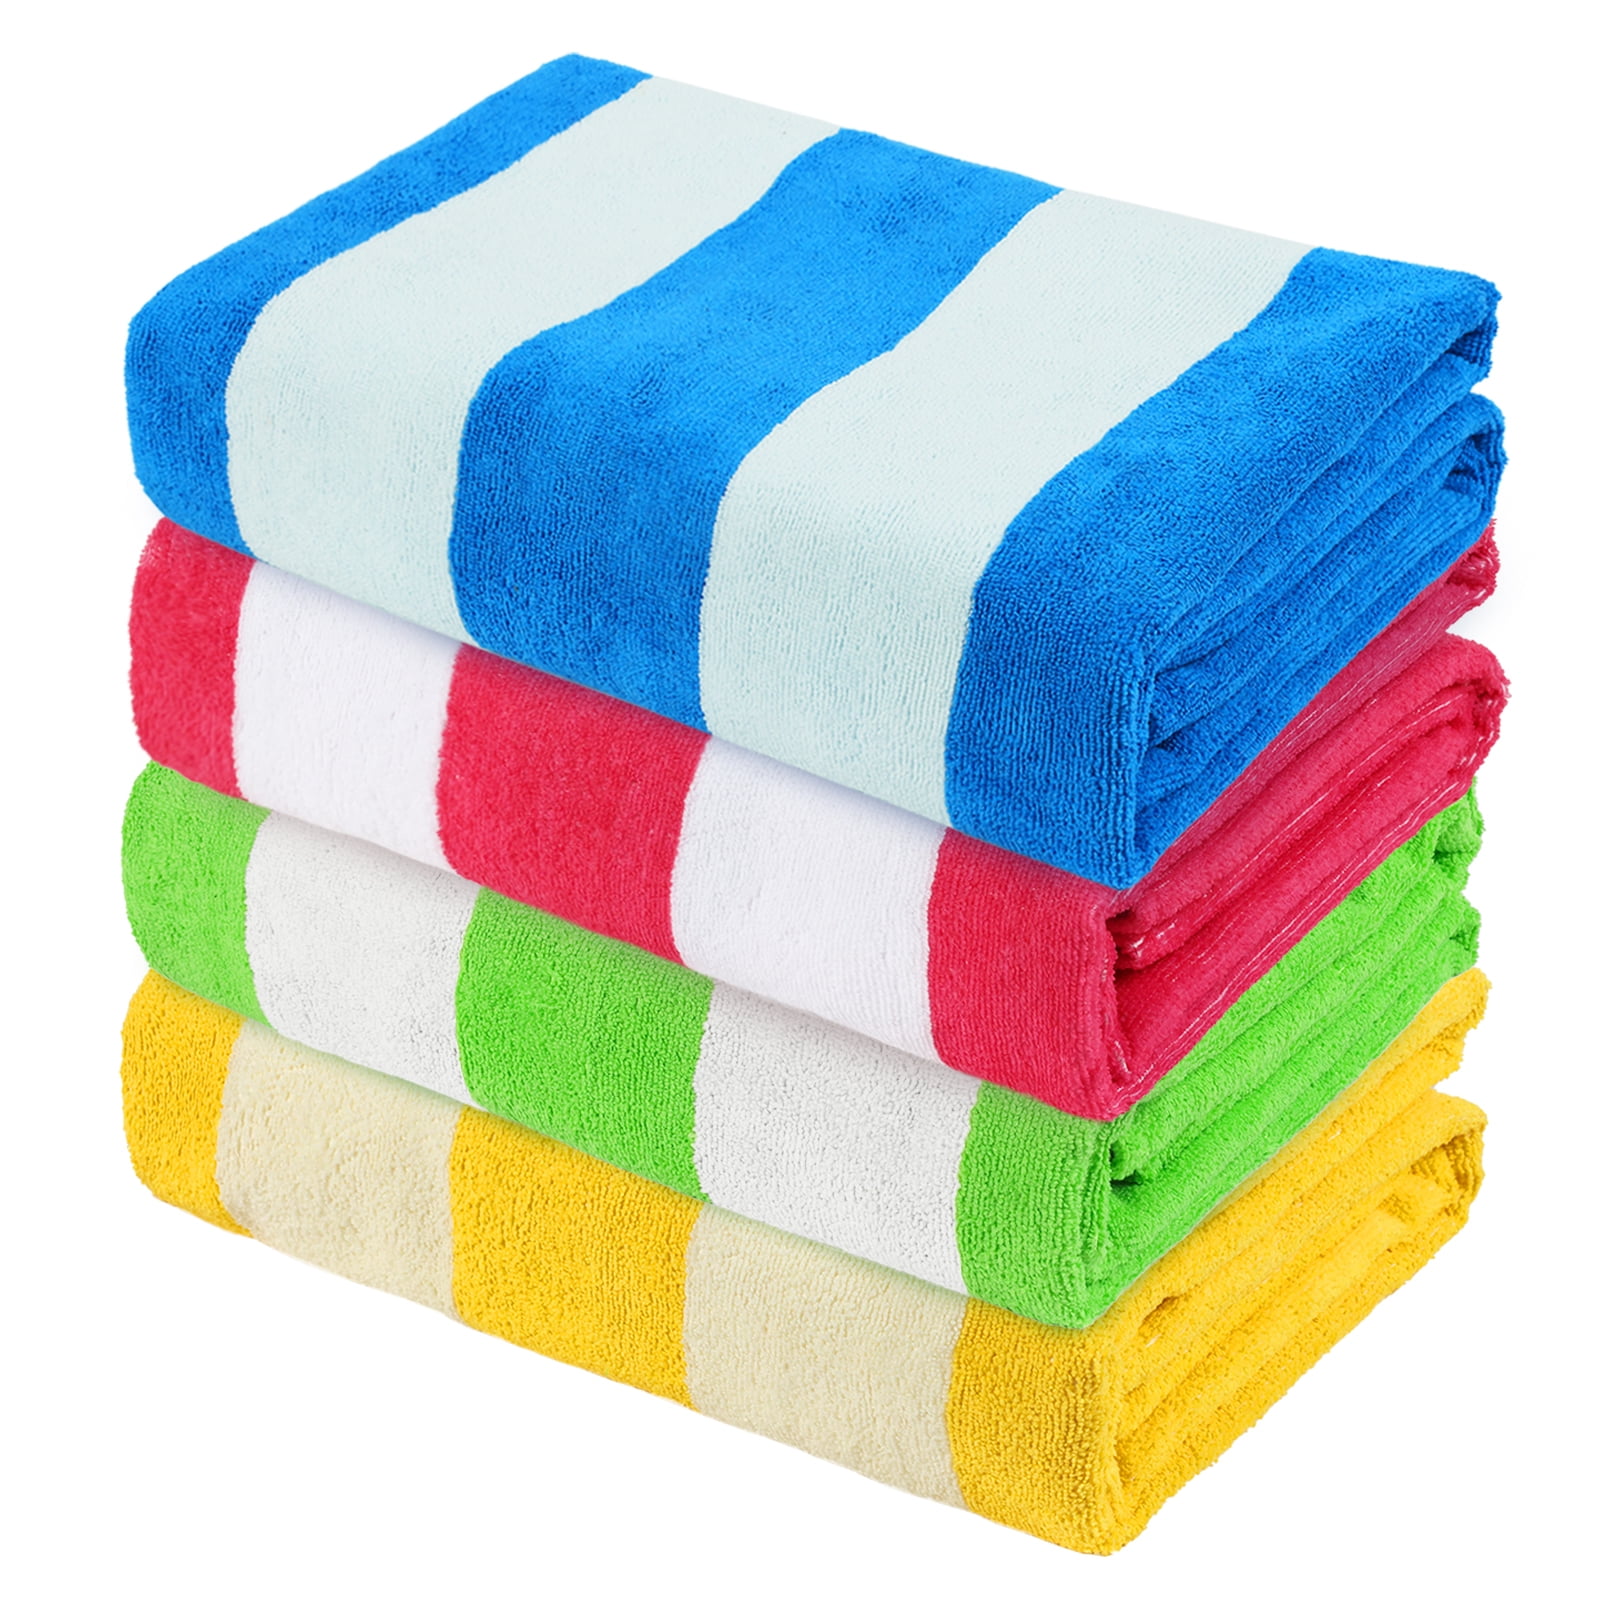 Voova & MOVAS 4Pack XL Large Bath Towels for Adults(34X68) - Cotton - Oversized Pool Beach Towels - Soft and Perfect Travel Towel for Men and